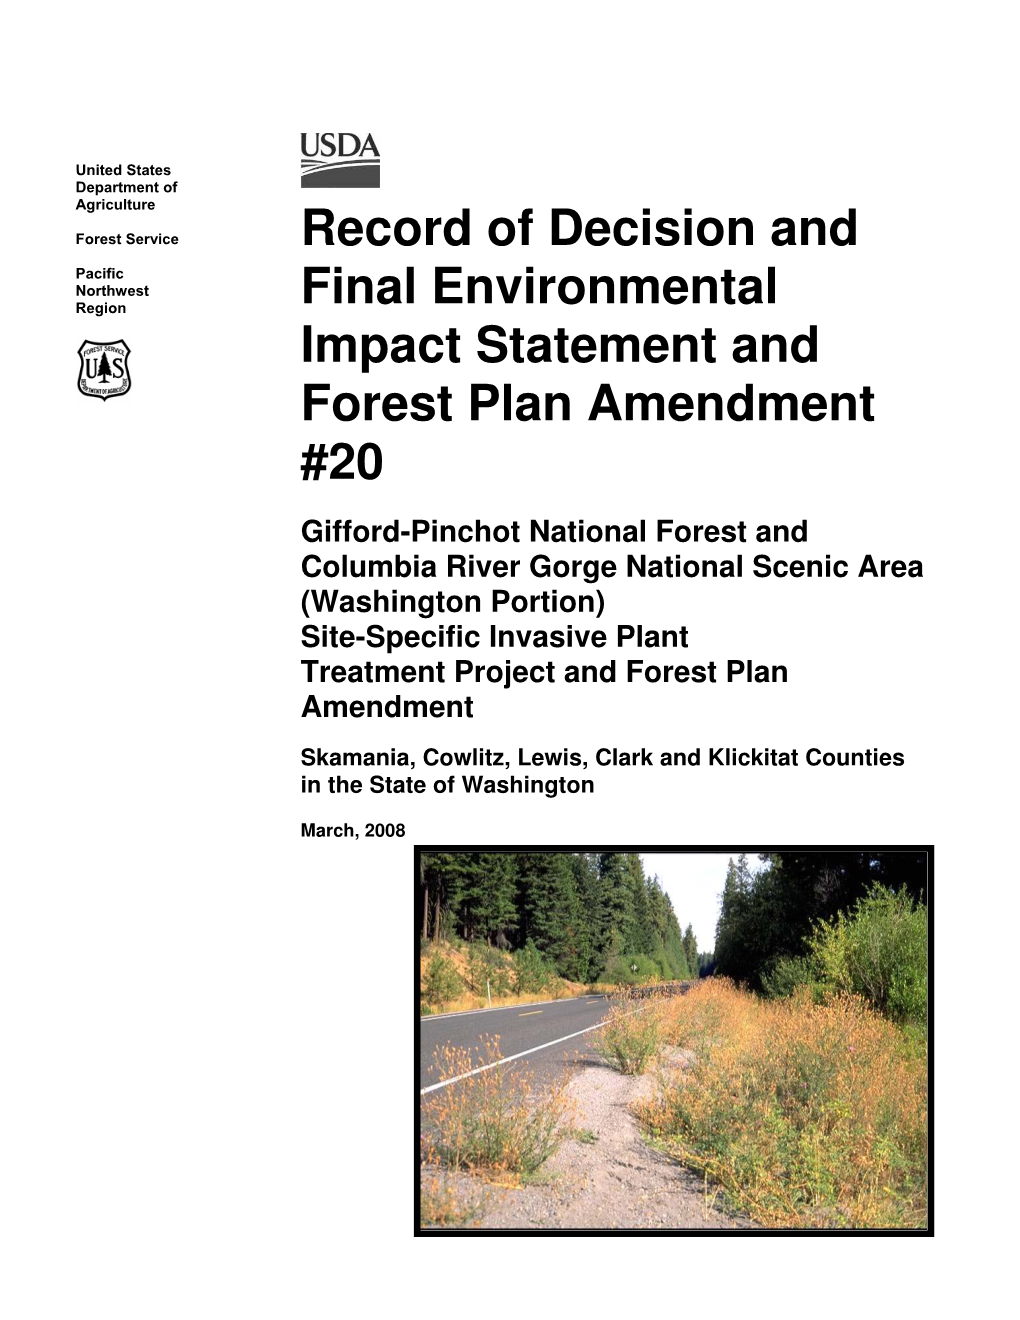 Record of Decision and Final Environmental Impact Statement